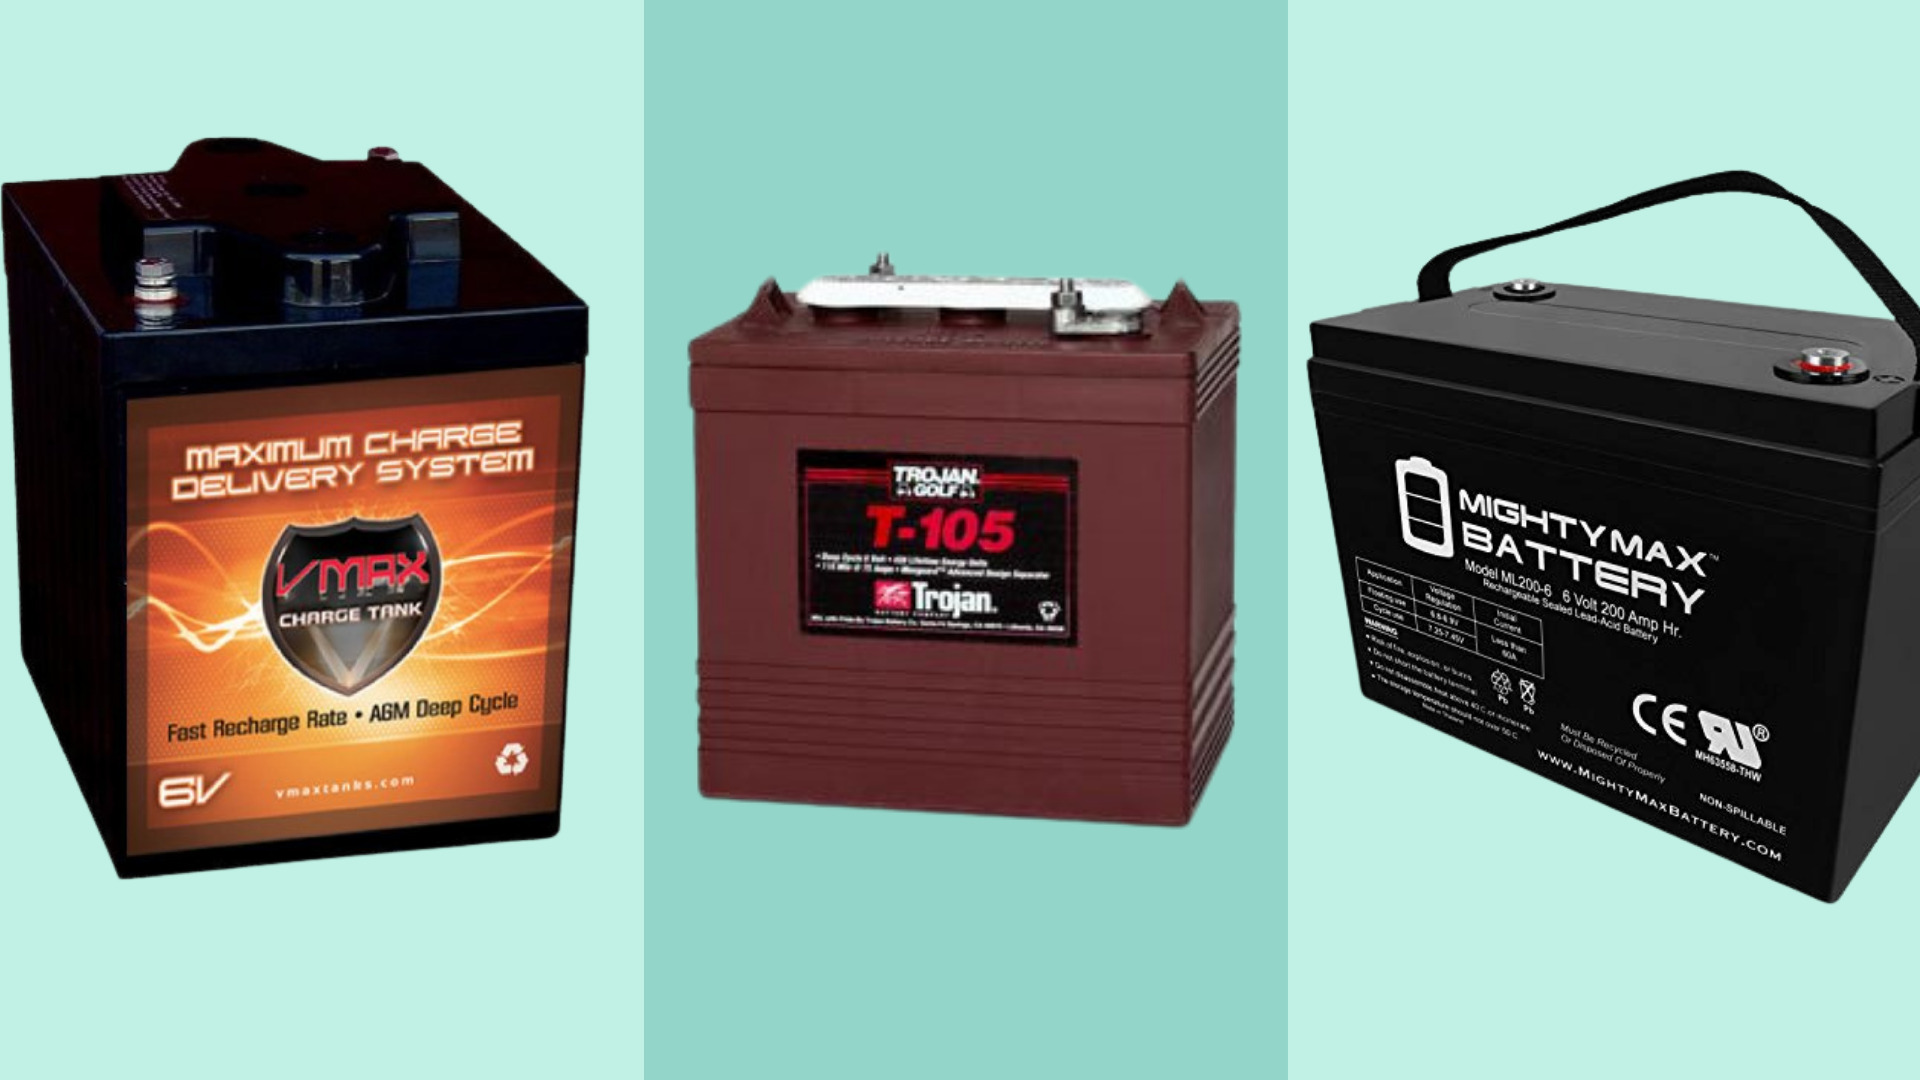 How Long to Charge a Car Battery at 6 Amps - The Ultimate Guide